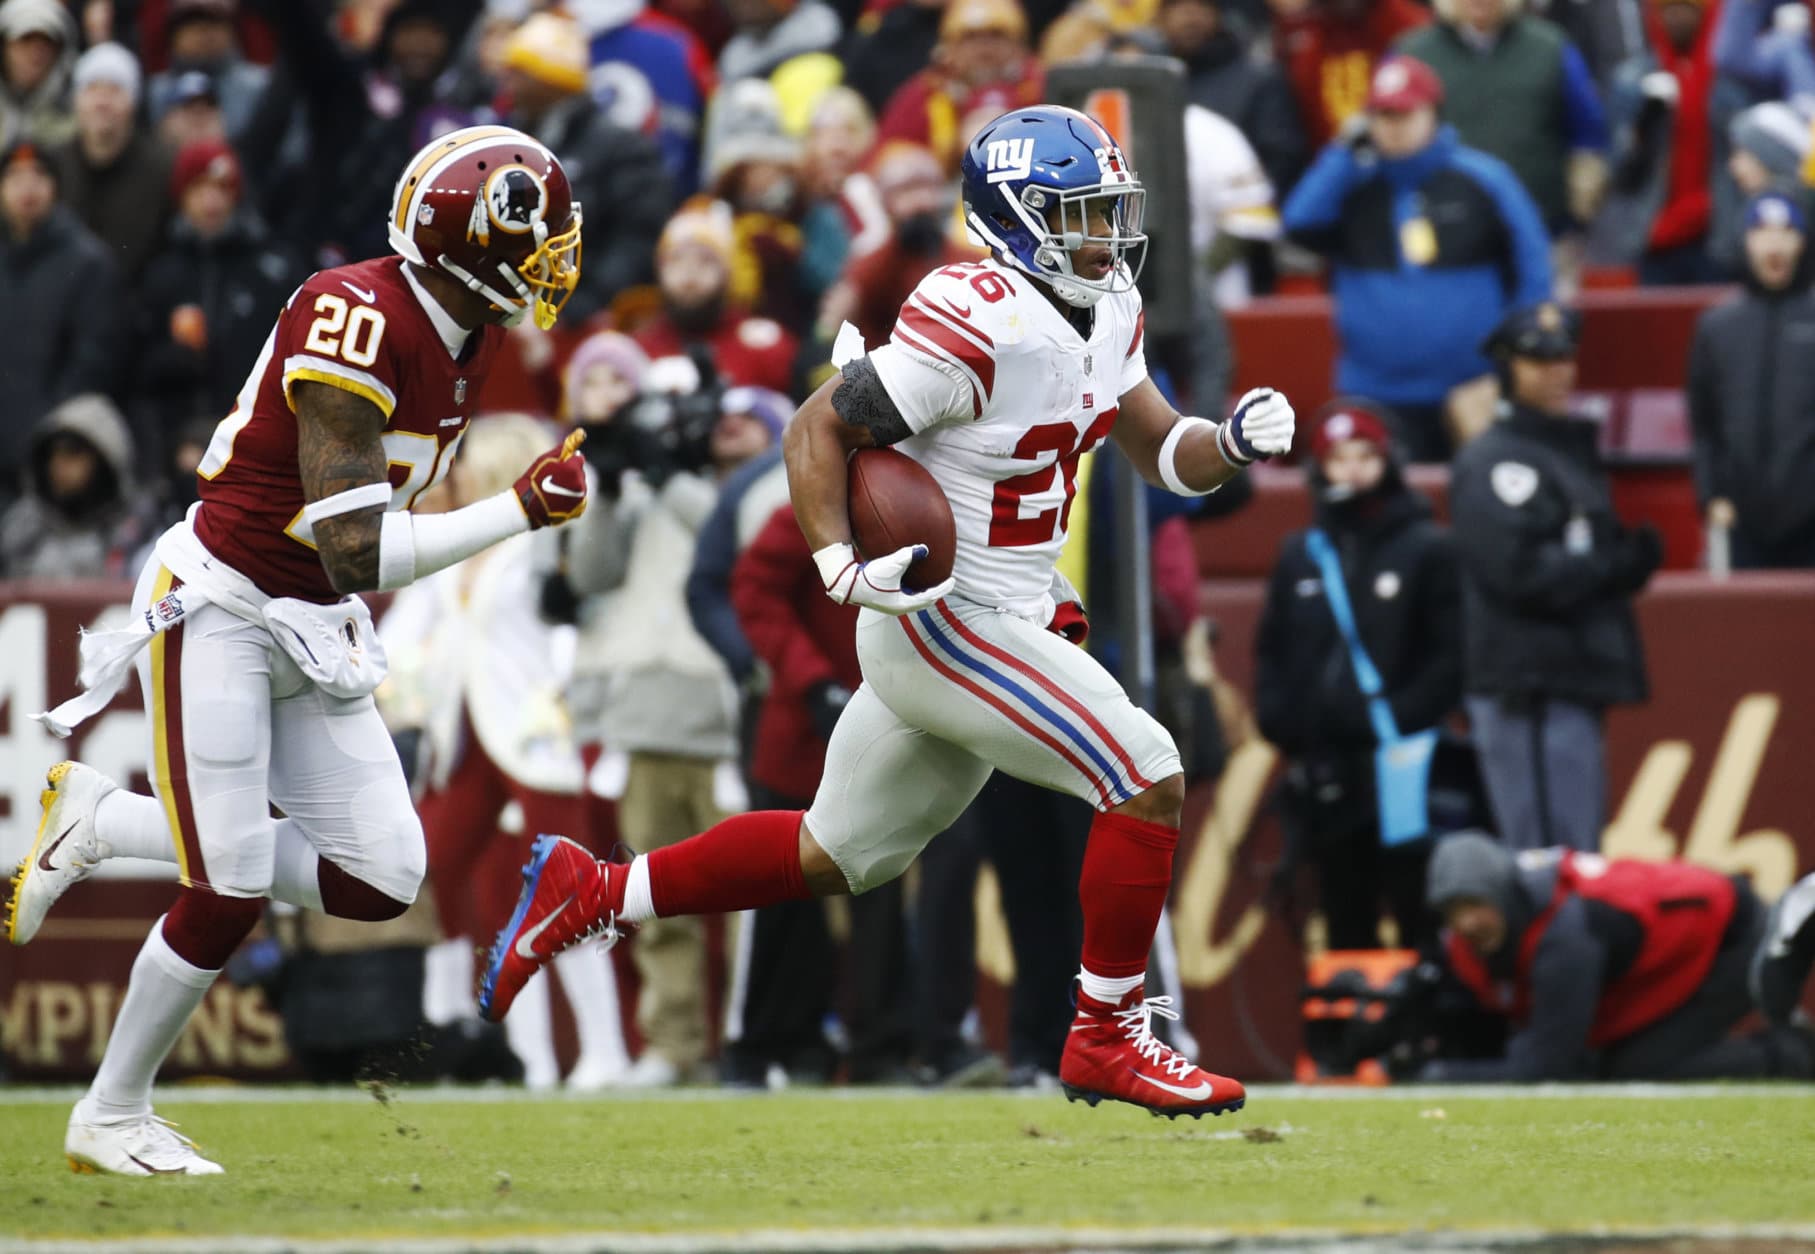 New York Giants running back Saquon Barkley (26) runs away from Washington Redskins strong safety Ha Ha Clinton-Dix (20) for a 78-yard touchdown during the first half of an NFL football game Sunday, Dec. 9, 2018, in Landover, Md. (AP Photo/Patrick Semansky)